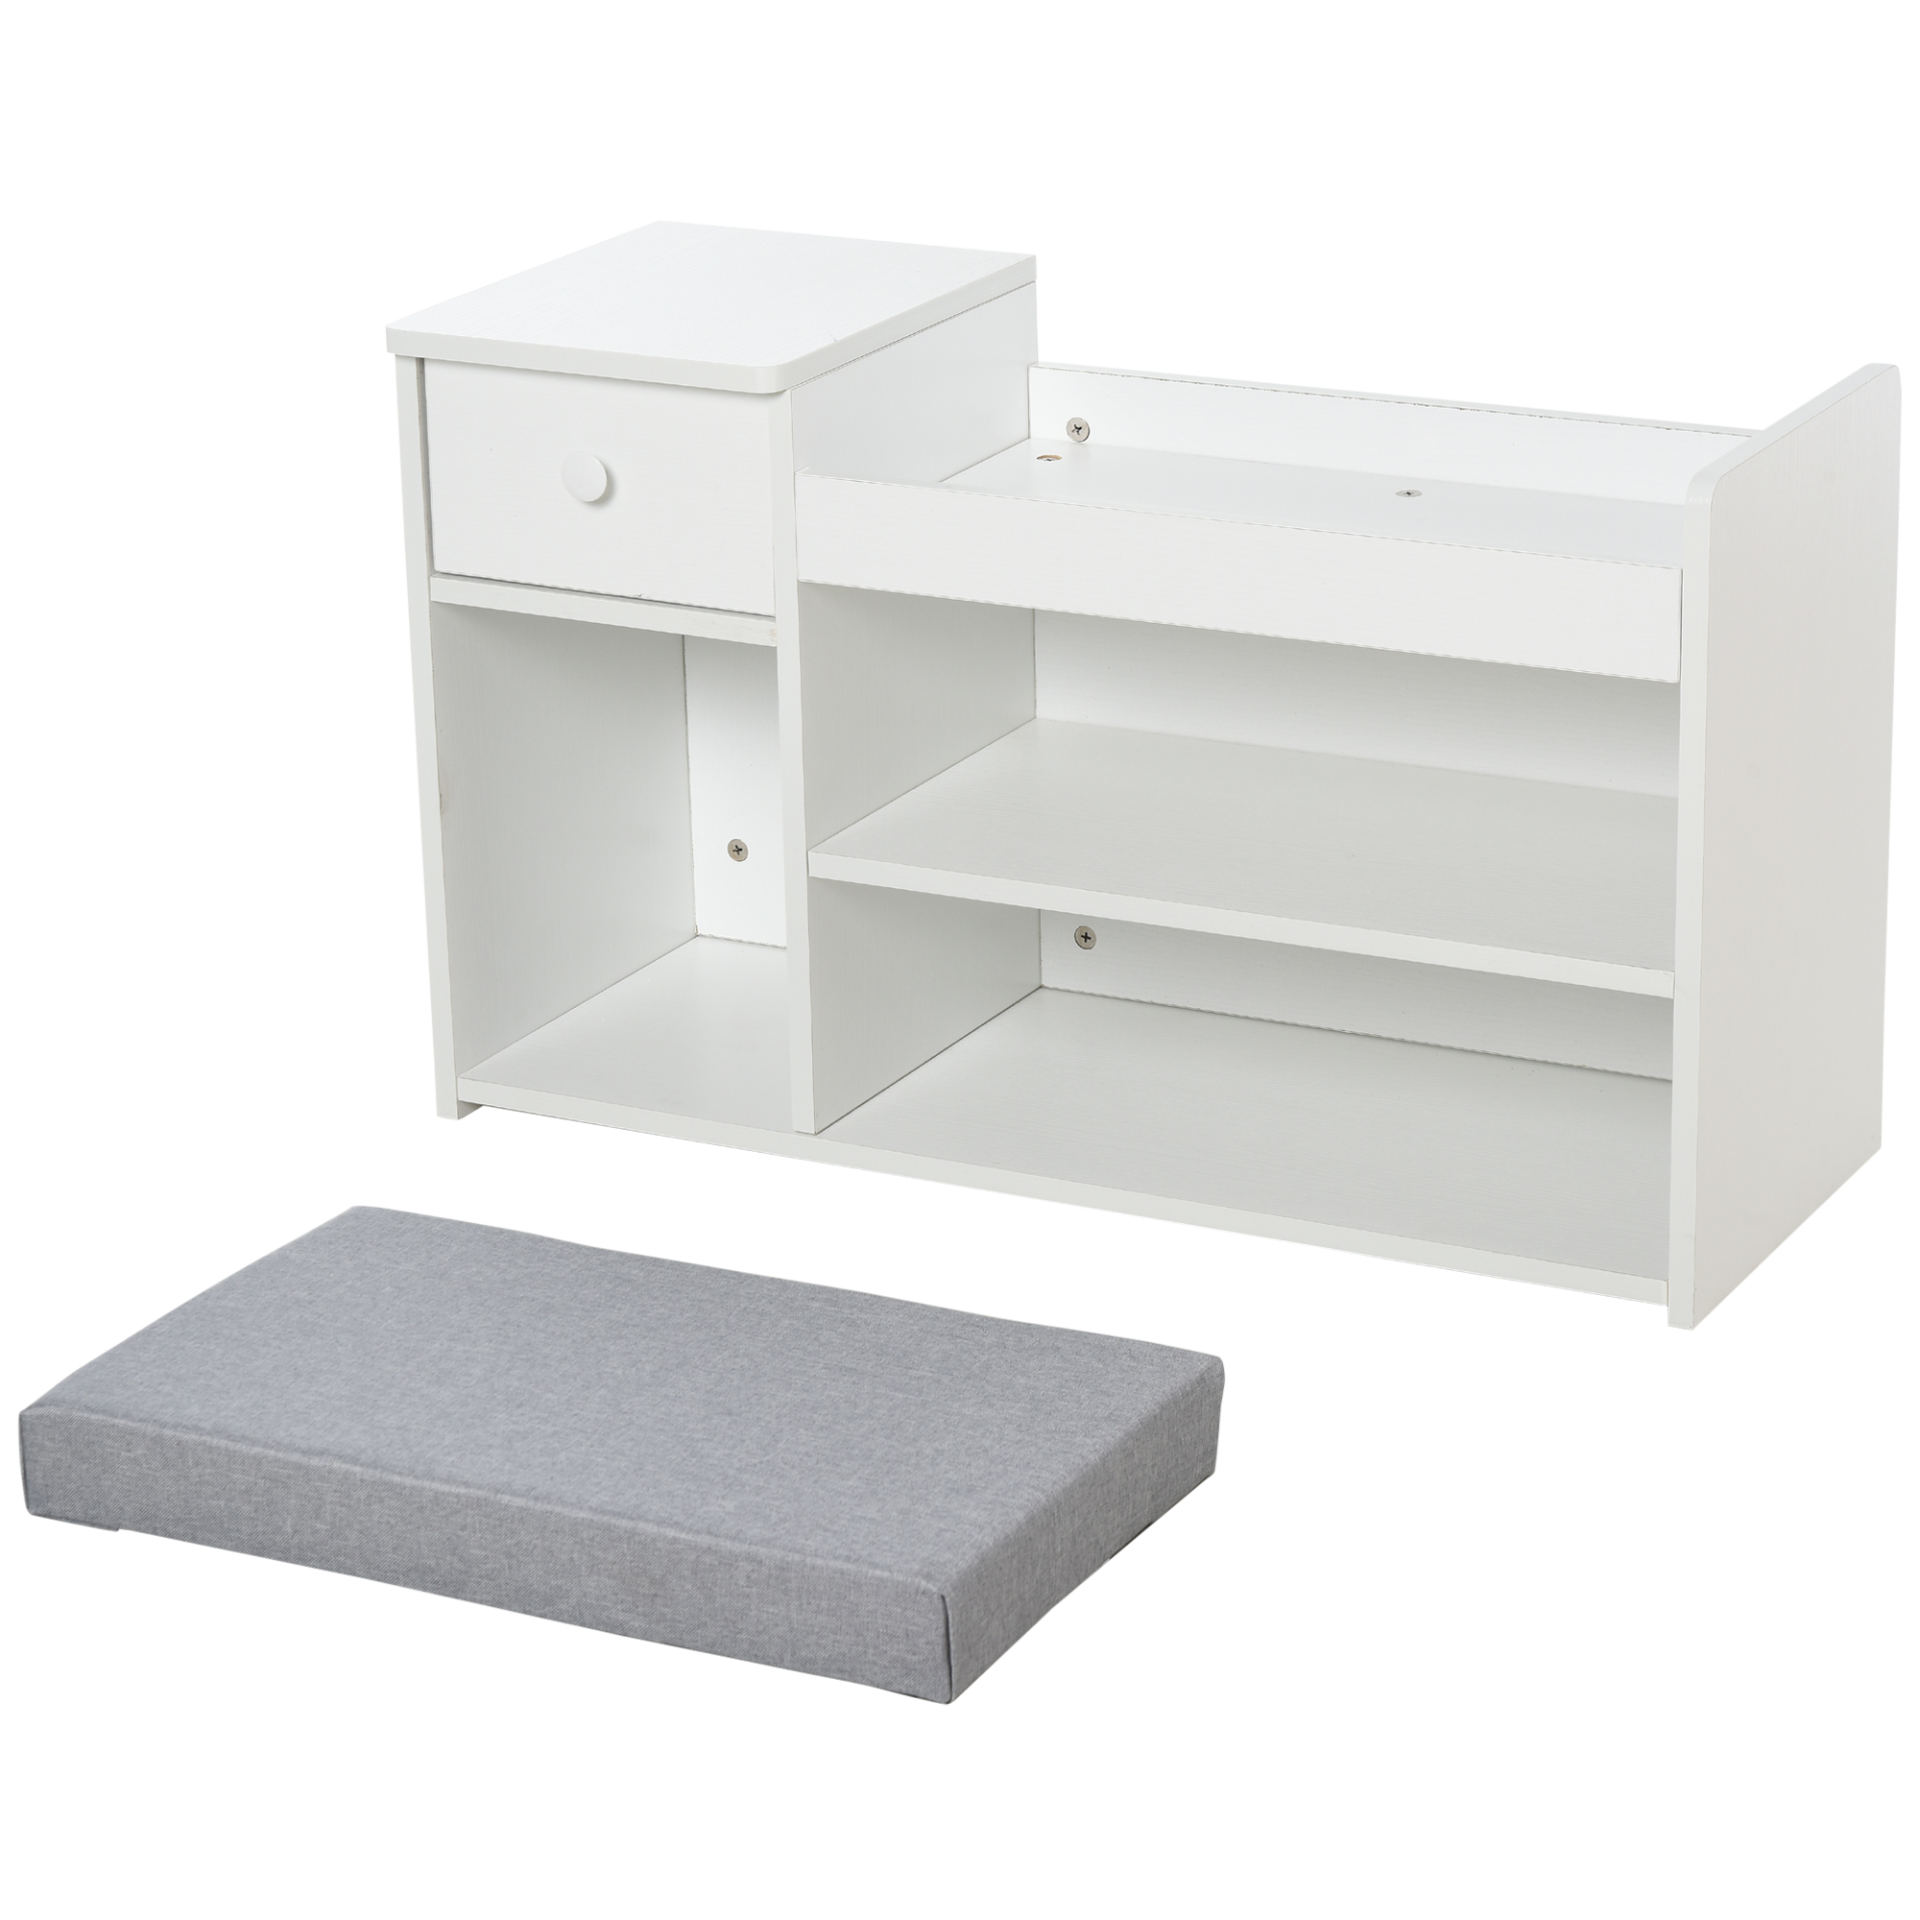 HOMCOM Multi-Storage Shoe Bench w/ Drawer 3 Compartments Cushioned Home Organisation Furniture Tidy Boots Hallway Entryway White